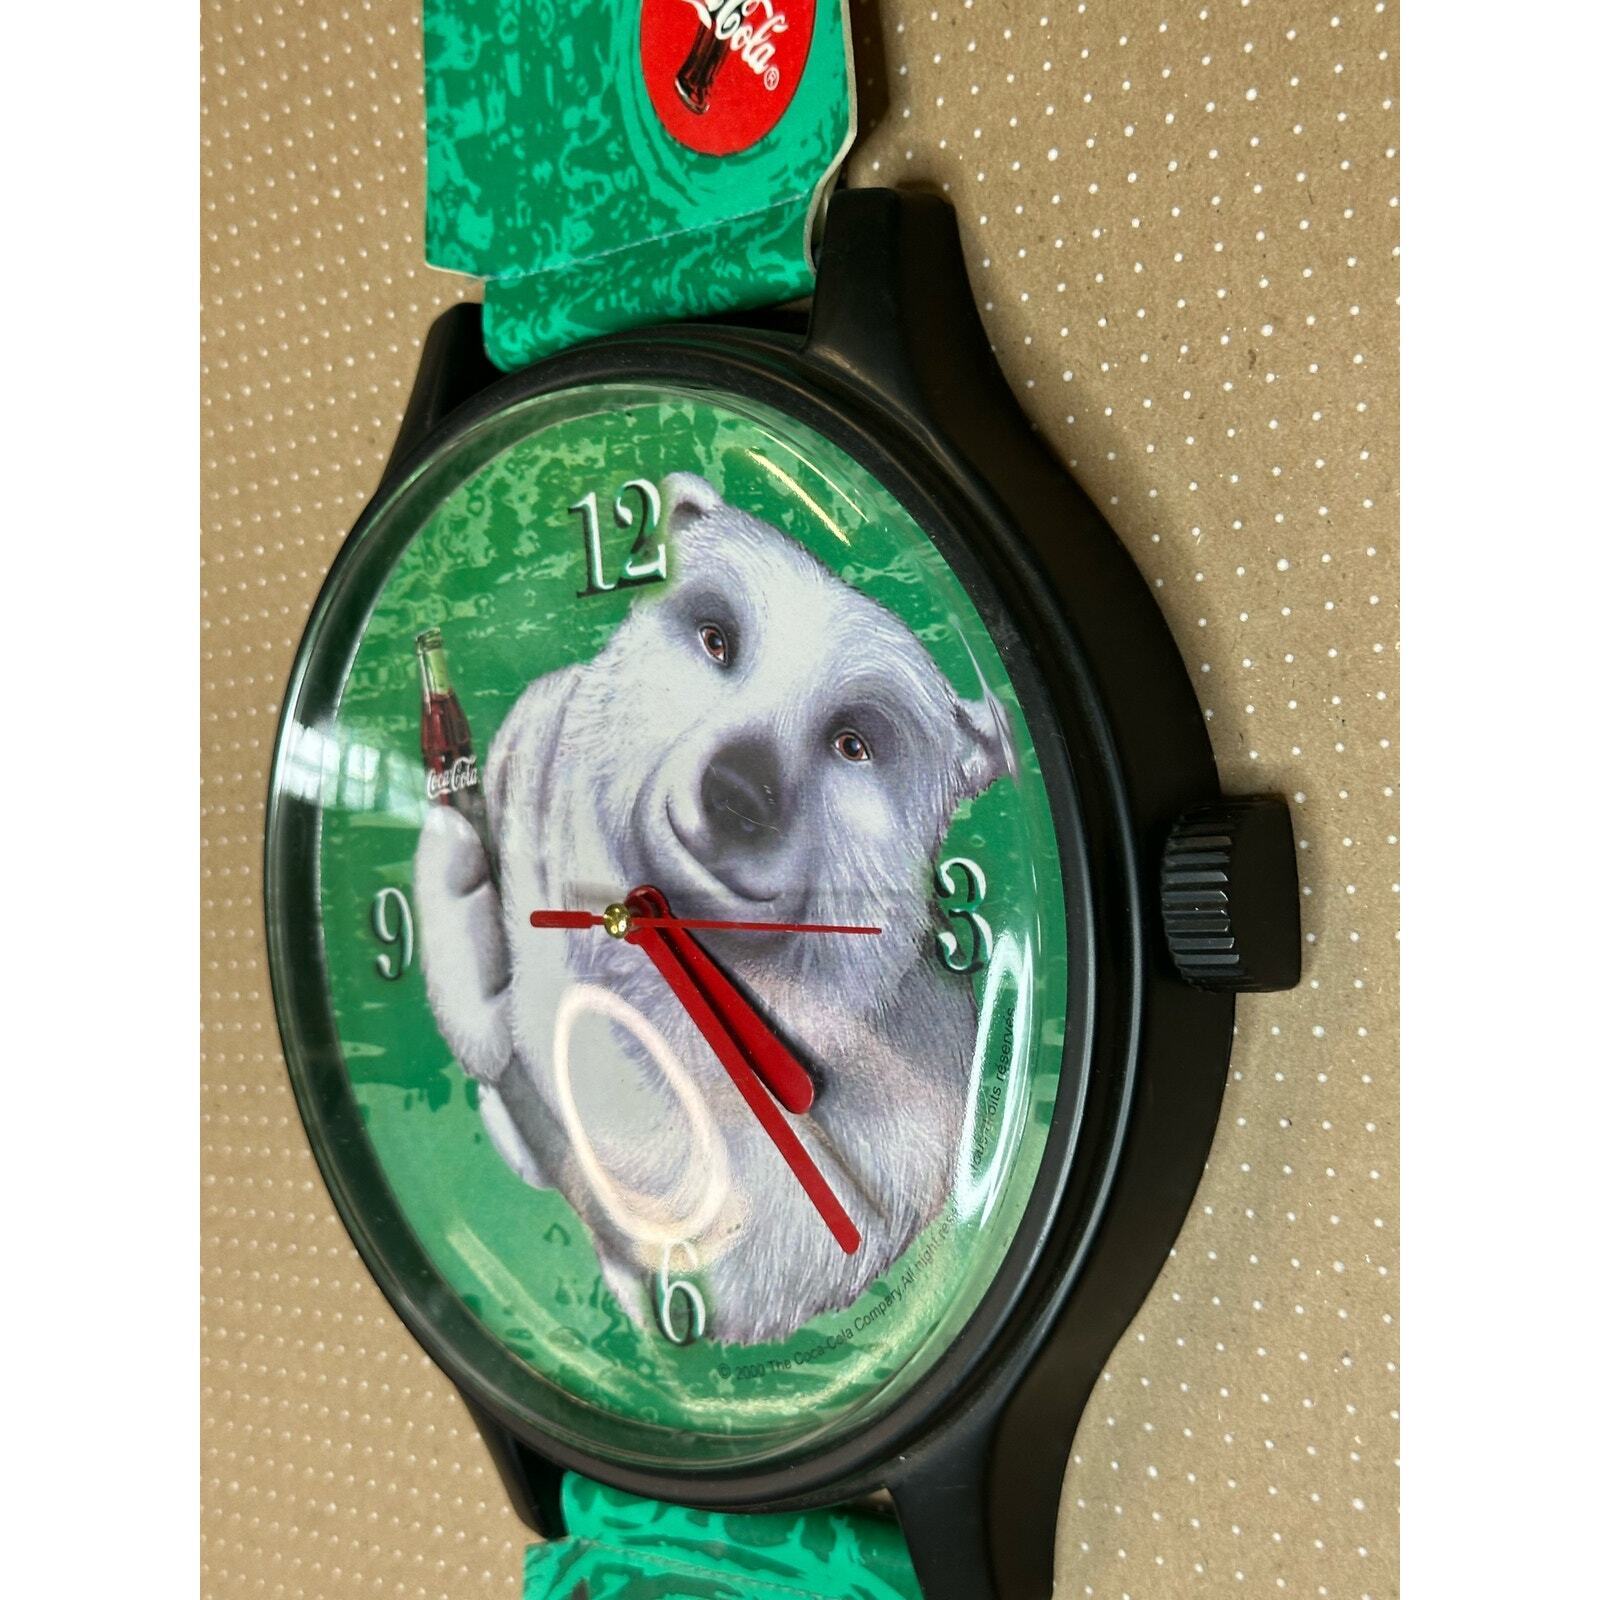 2000 Coca-Cola watch style Wall Clock, 45\